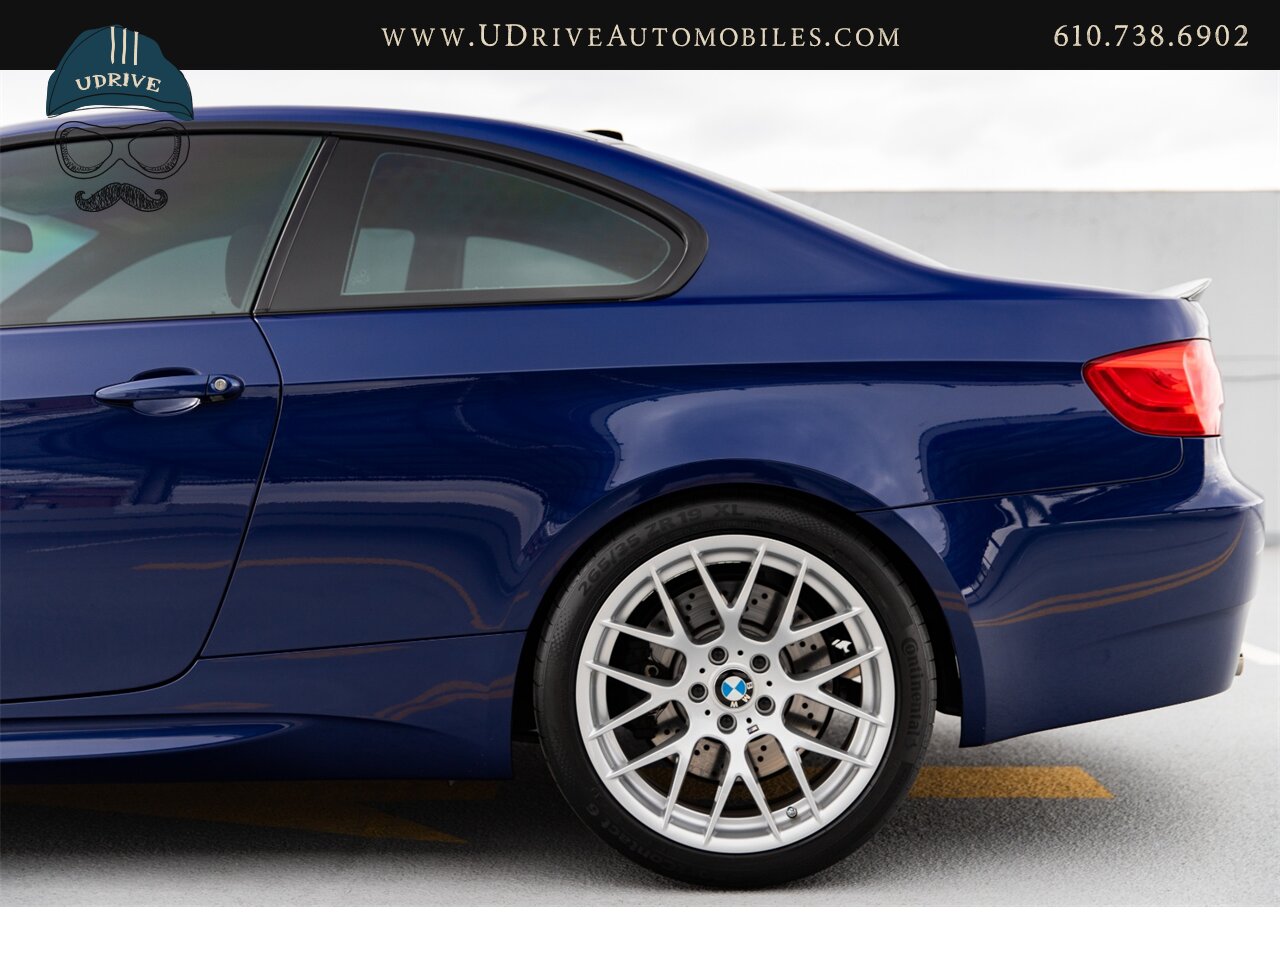 2011 BMW M3 E92 6 Speed Manual Competition Pkg Interlagos Blue  16k Miles Nav PDC EDC Comf Acc - Photo 24 - West Chester, PA 19382